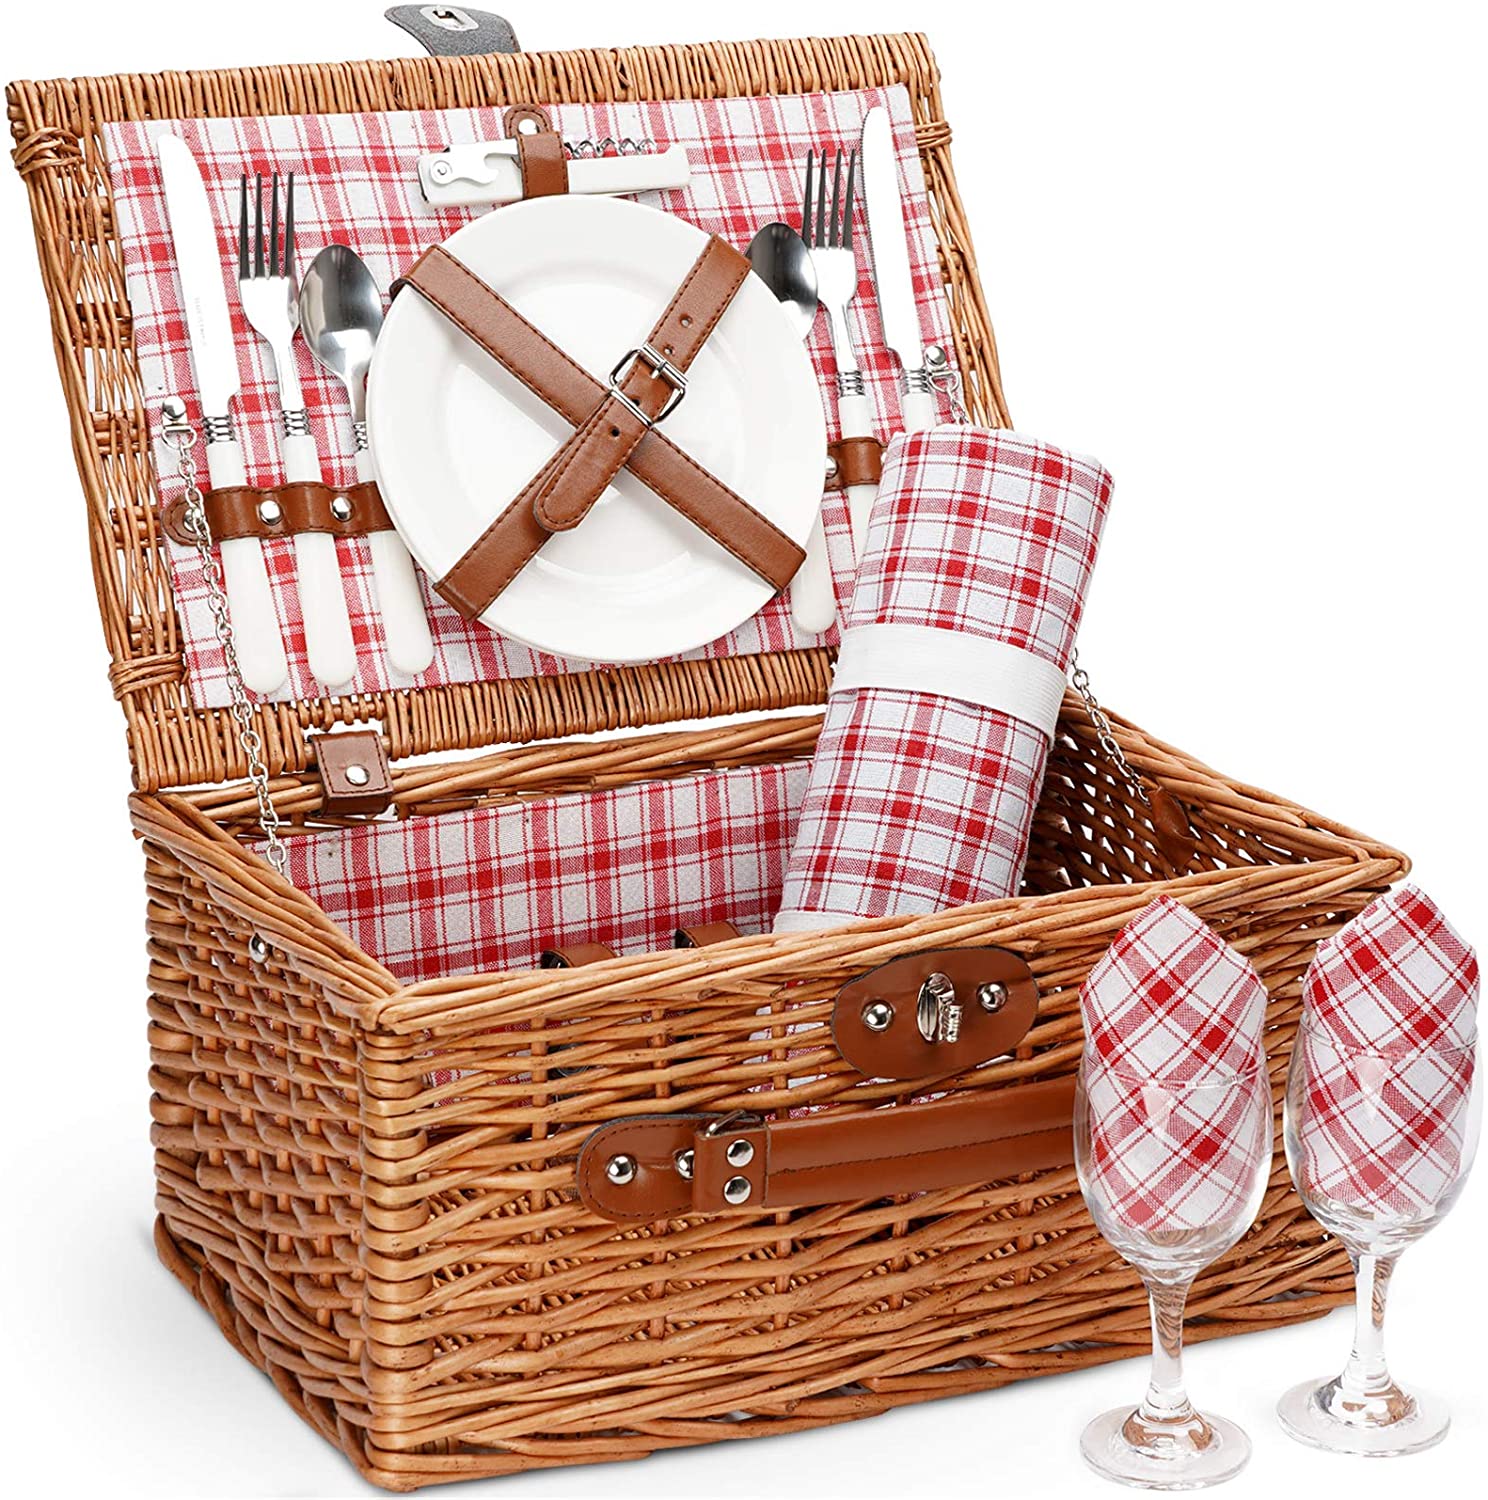 Review of Picnic Basket for 2, with Waterproof Picnic Blanket by G Good Gain